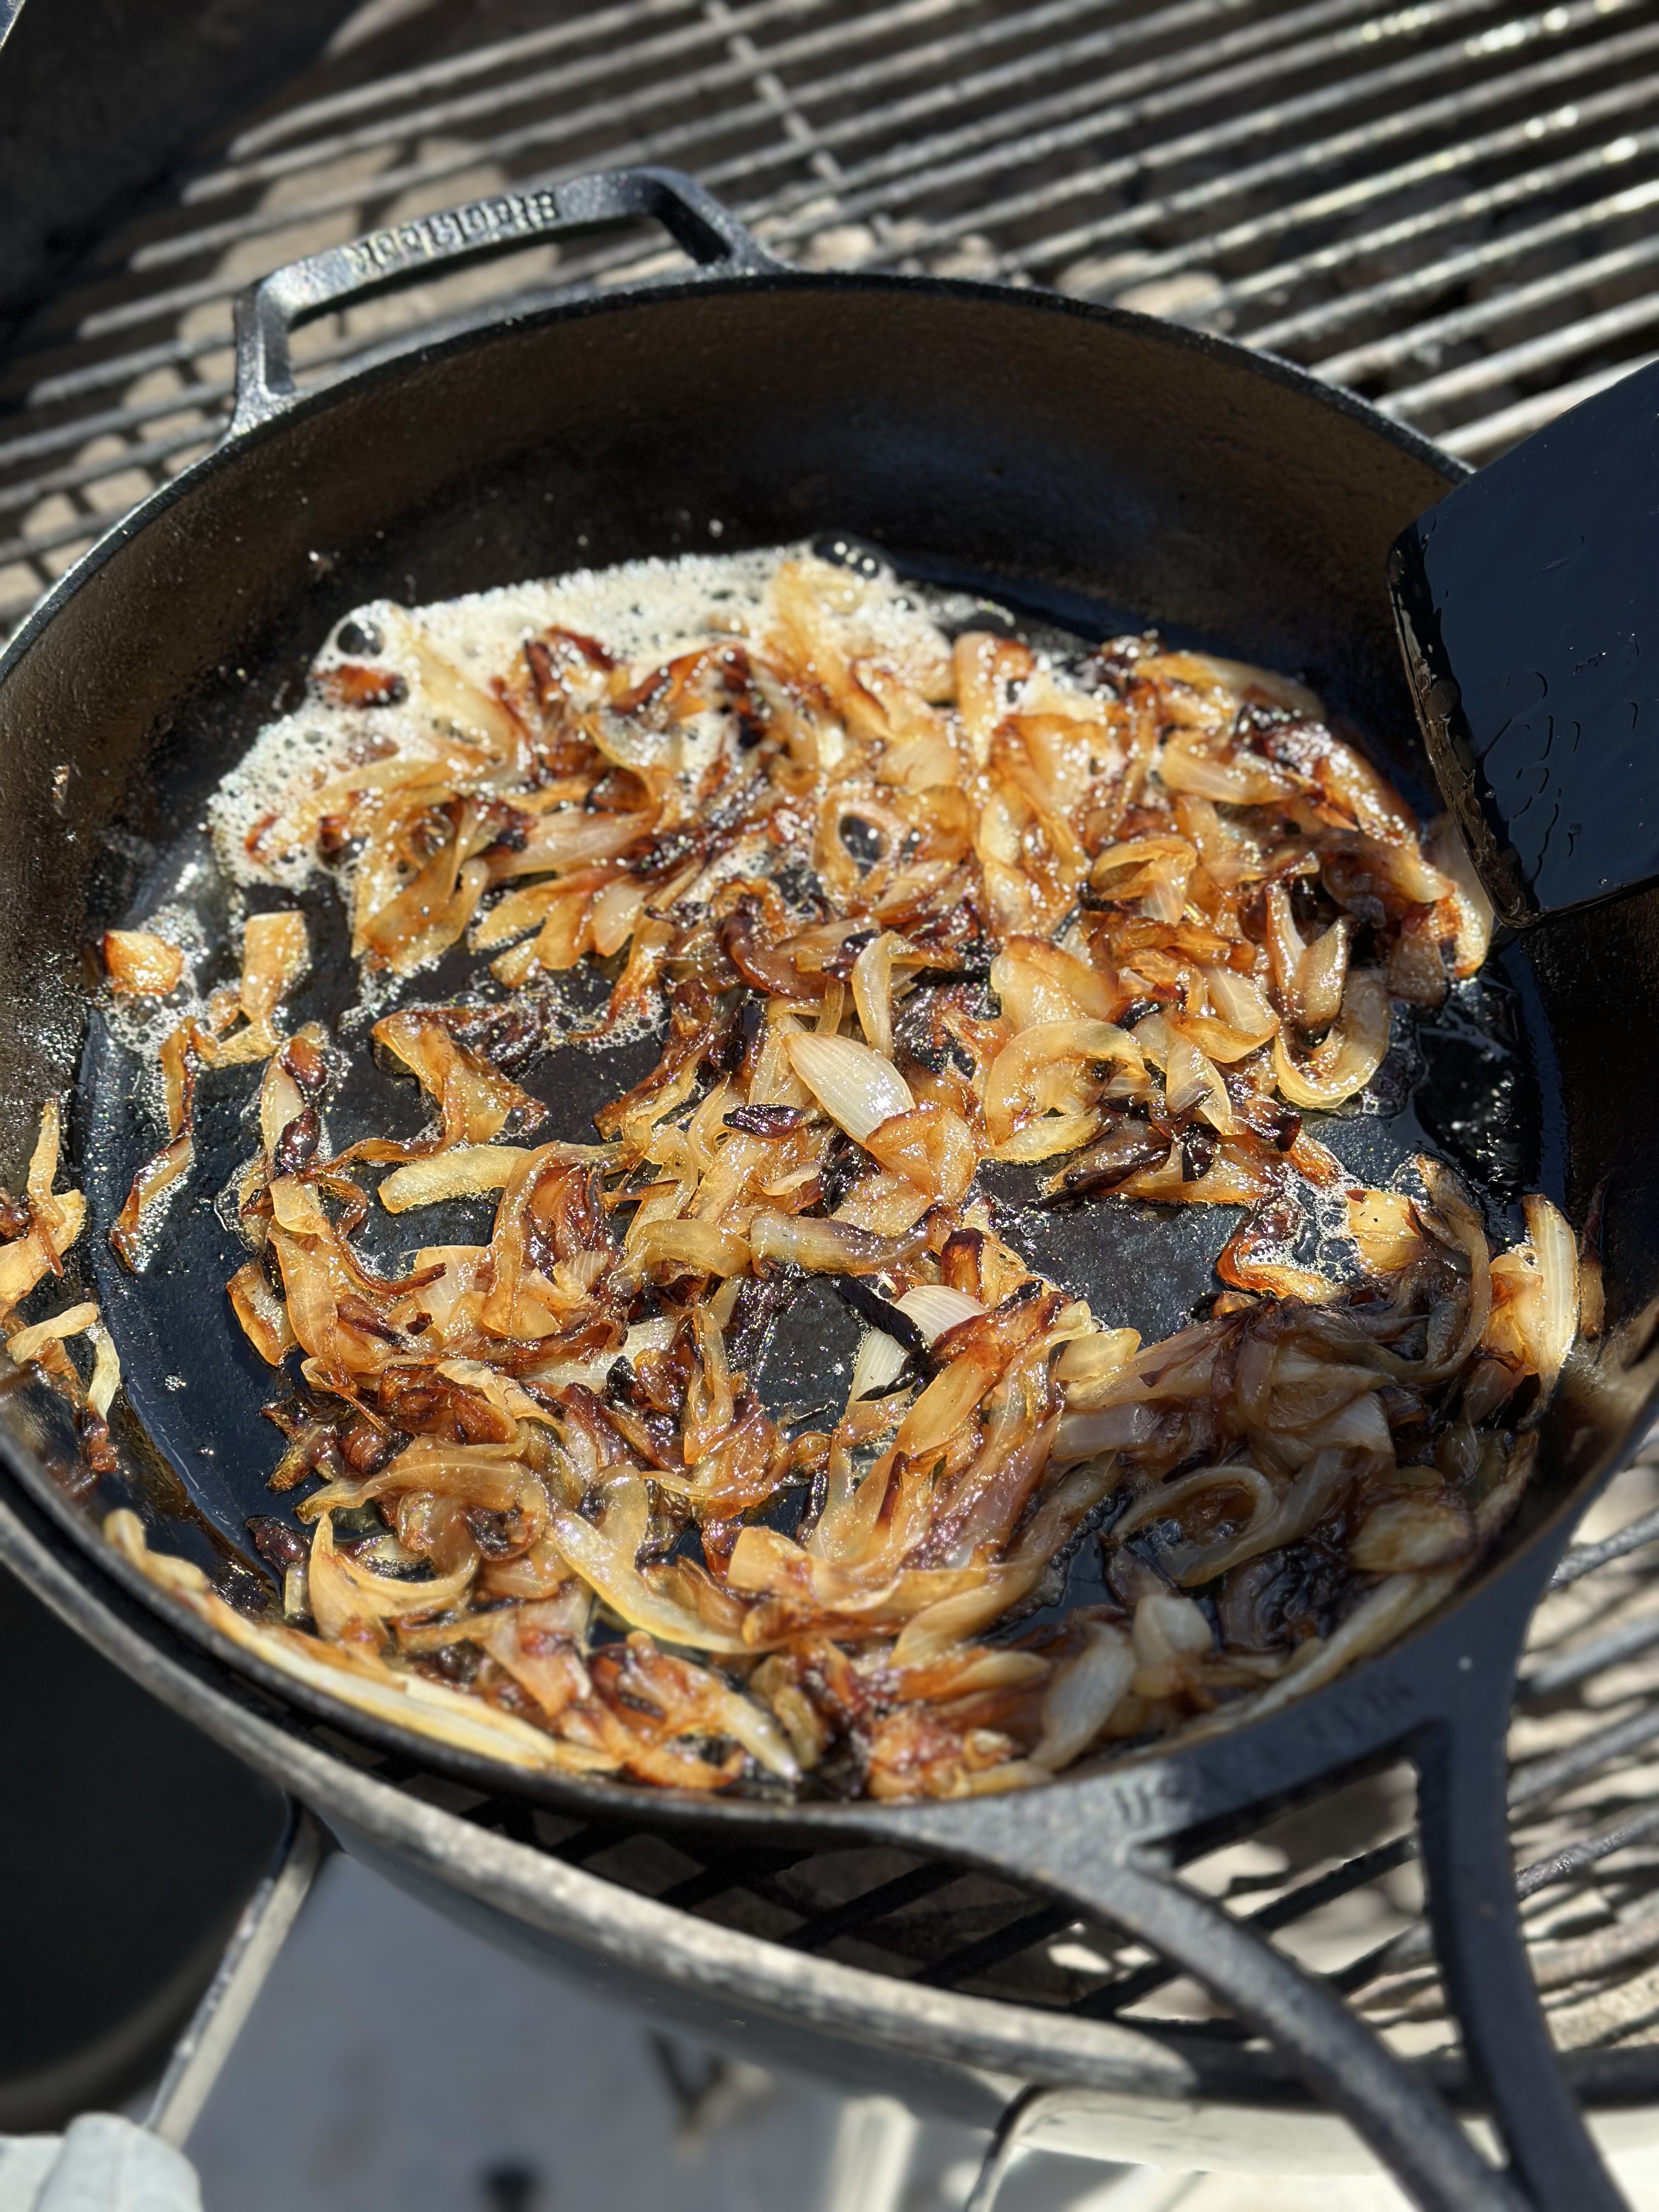 Slow cooked onions in a skillet makes it caramelize. 